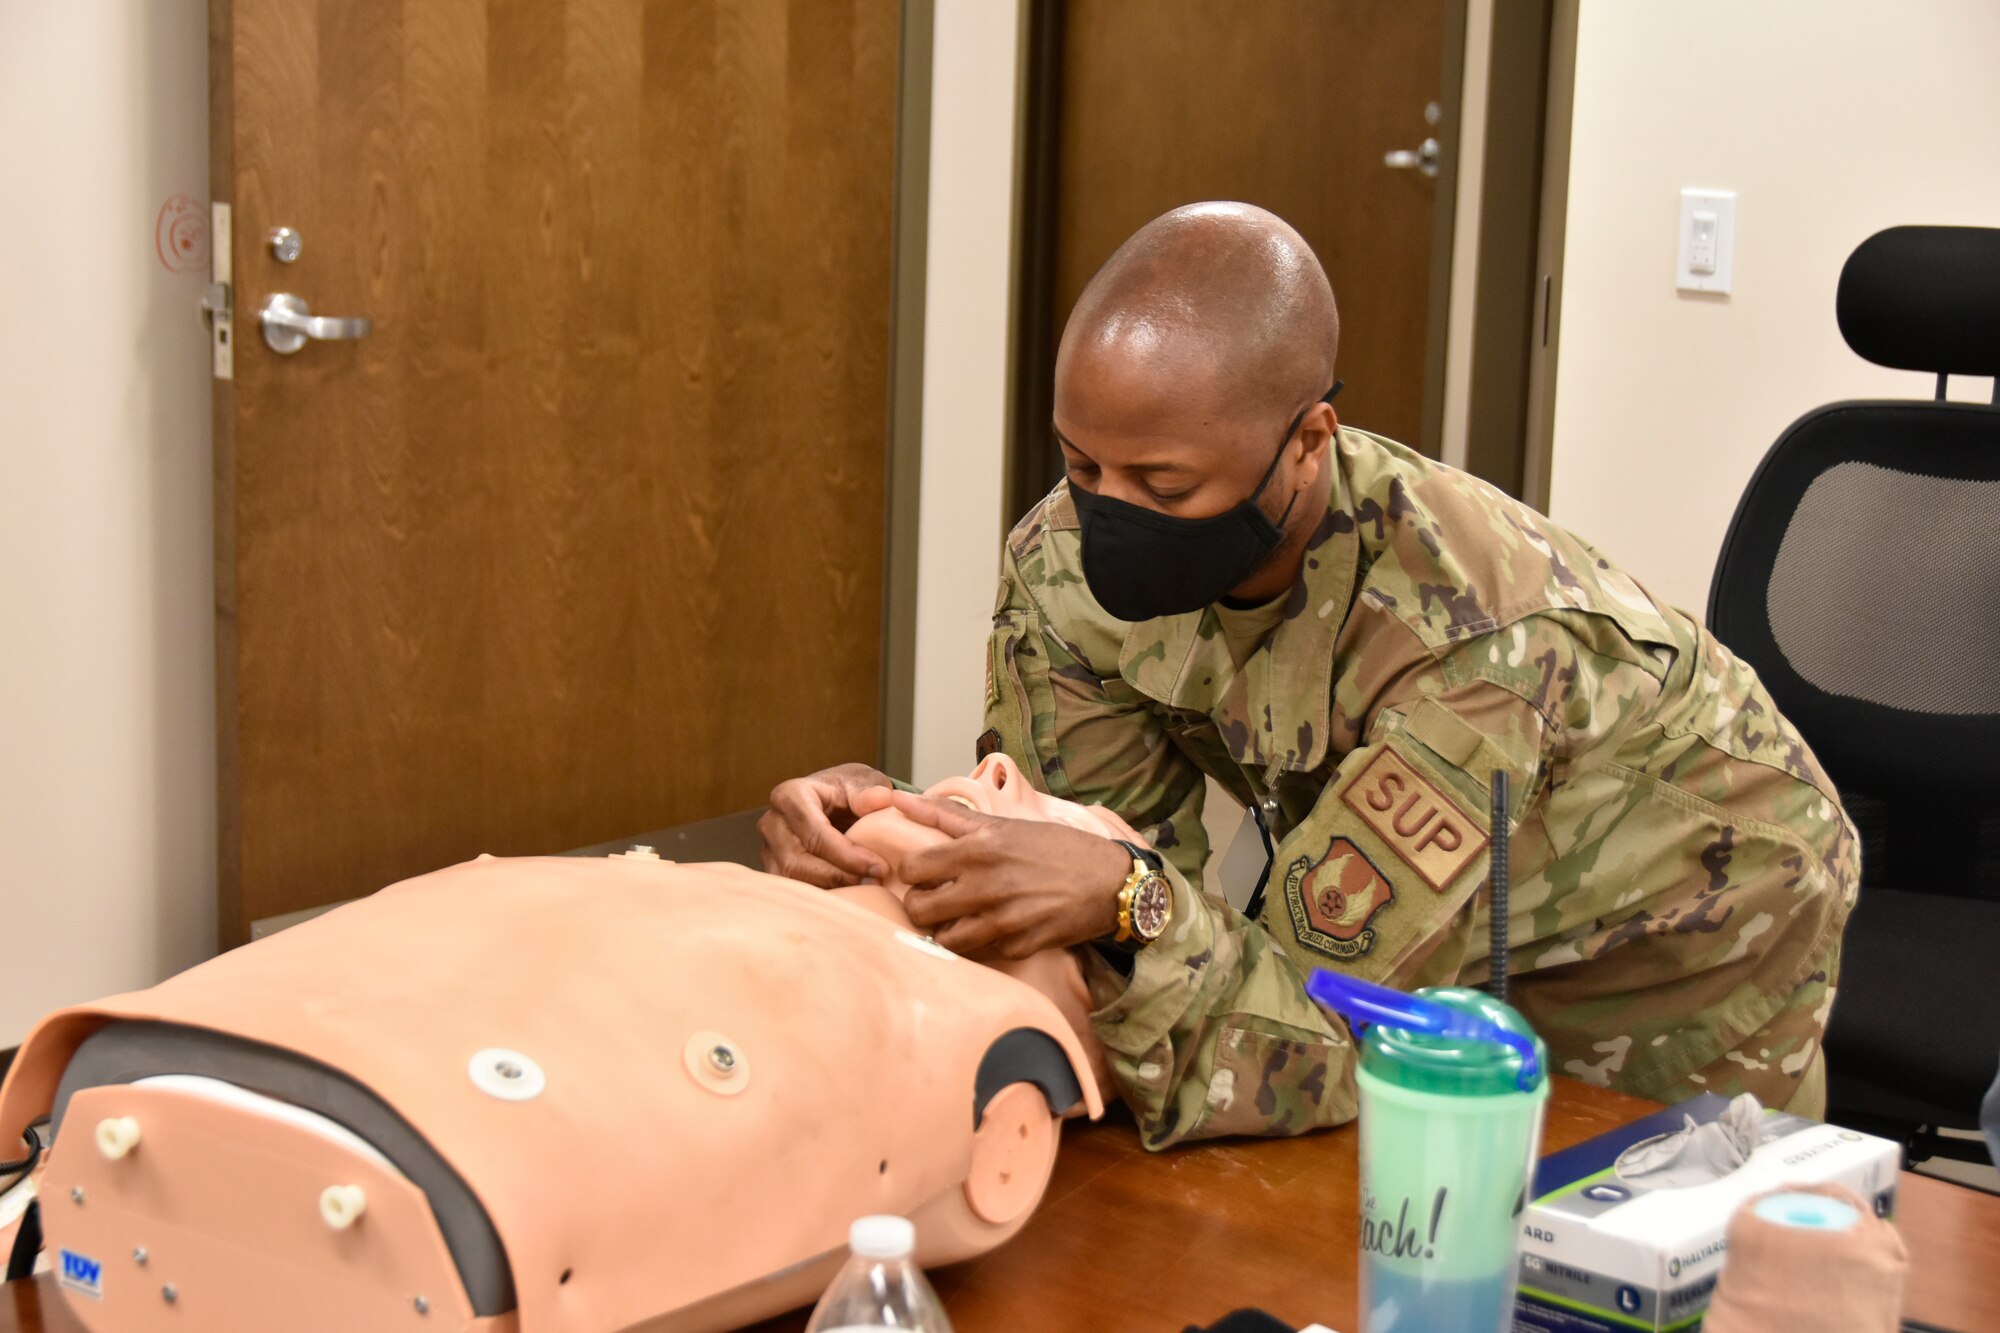 Master Sgt. Don Wilson practices the jaw thrust technique for opening a victim’s airway during Tactical Combat Casualty Care training Aug. 15, 2022, at the Medical Aid Station, Arnold Air Force Base, Tennessee. TCCC trainees are taught lifesaving techniques, strategies and procedures, allowing those who have been trained to provide best practice trauma care both on and off the battlefield. Wilson was part of the first TCCC class at Arnold. The first level of TCCC training is required by all Department of Defense service members by April 2023. (U.S. Air Force photo by Bradley Hicks) (This image was altered by obscuring a badge for security purposes)